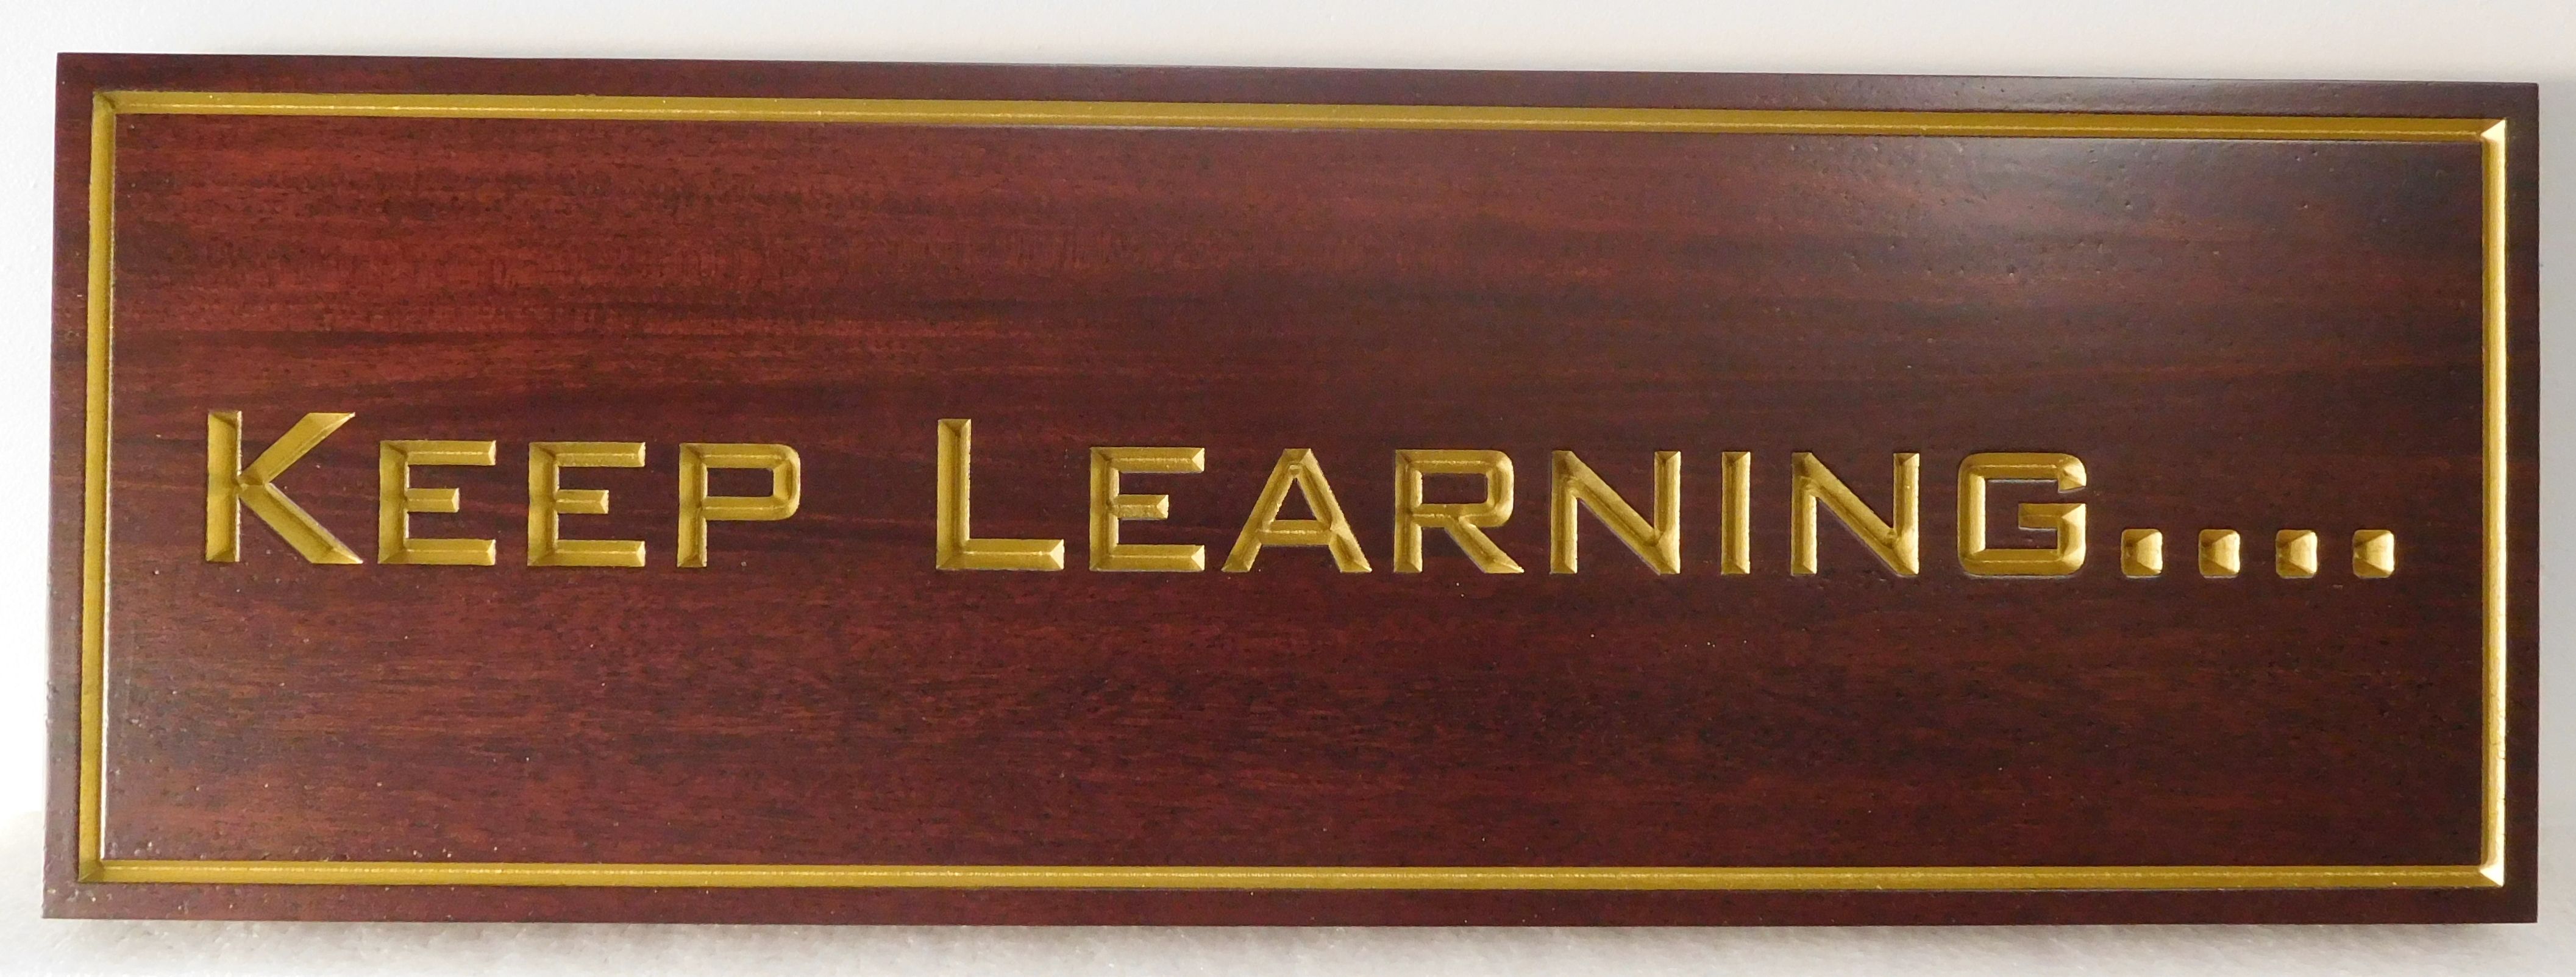 TP-1480 - Engraved Wall Plaque with Quote "Keep Learning",  with Gold Metallic Paint on Mahogany 